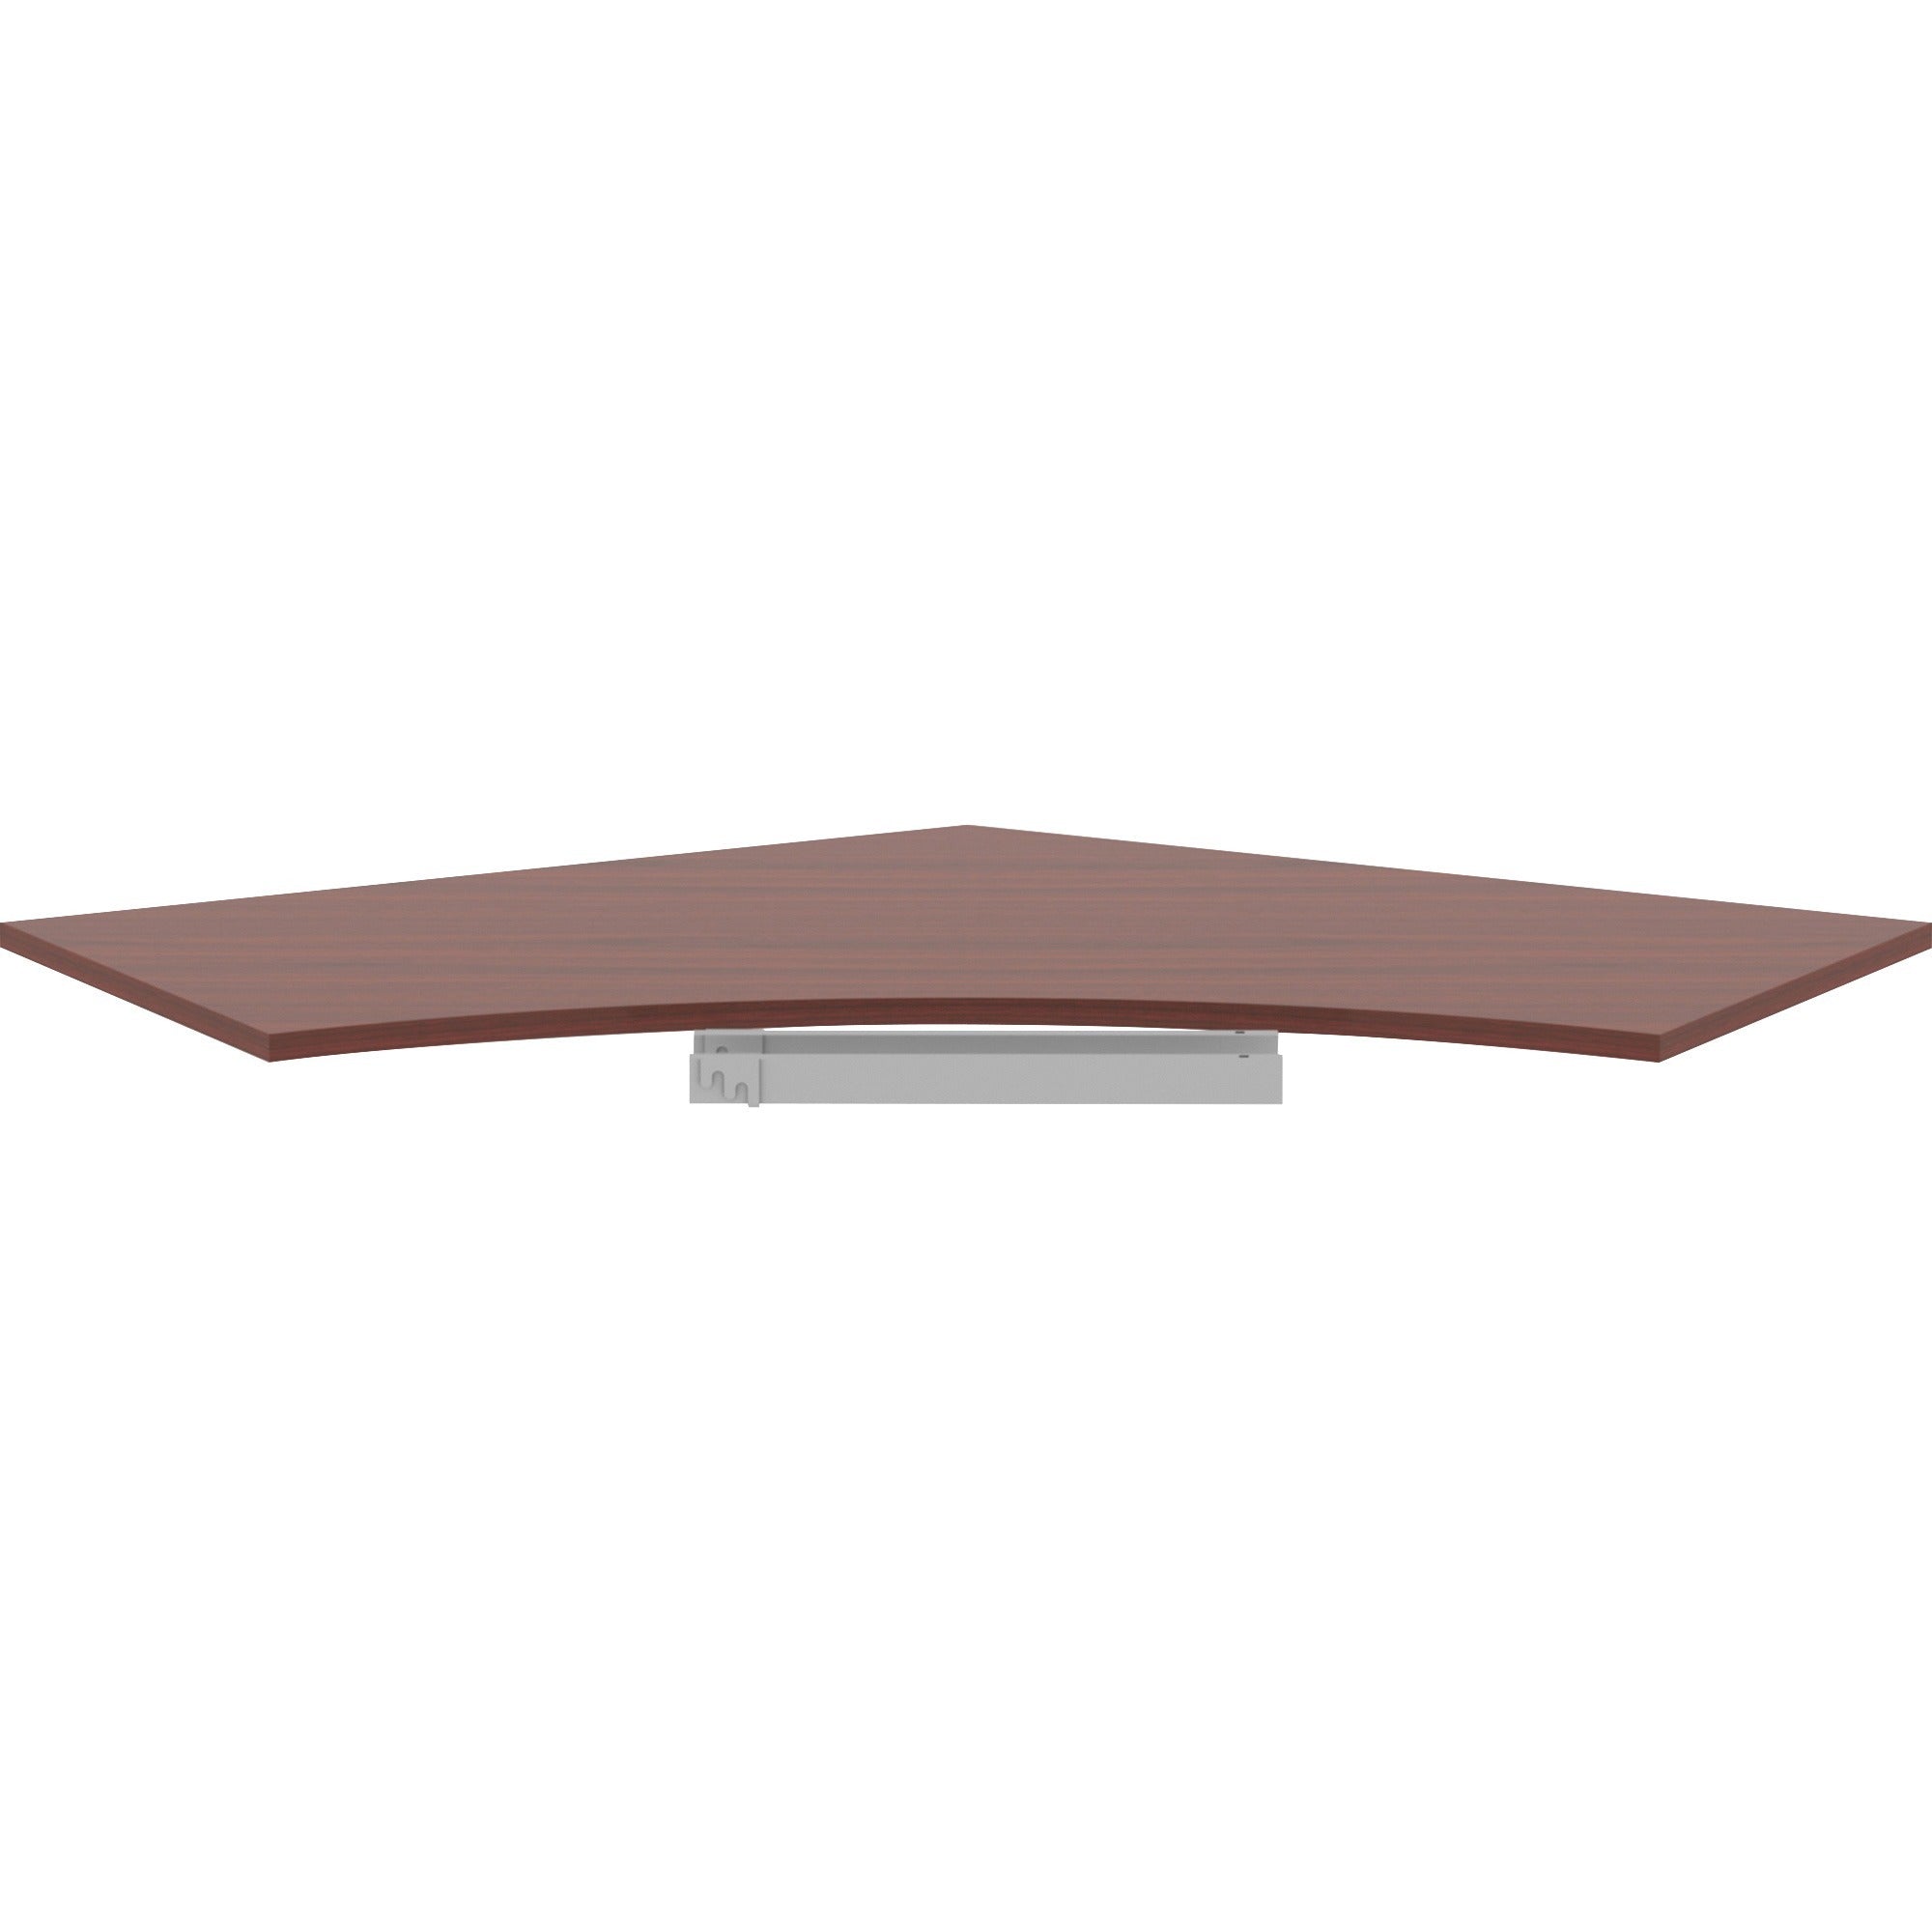 lorell-relevance-series-curve-worksurface-for-120-workstations-for-table-topmahogany-rectangle-top-contemporary-style-4725-table-top-length-x-3413-table-top-width-x-1-table-top-thickness-assembly-required-1-each_llr16248 - 2